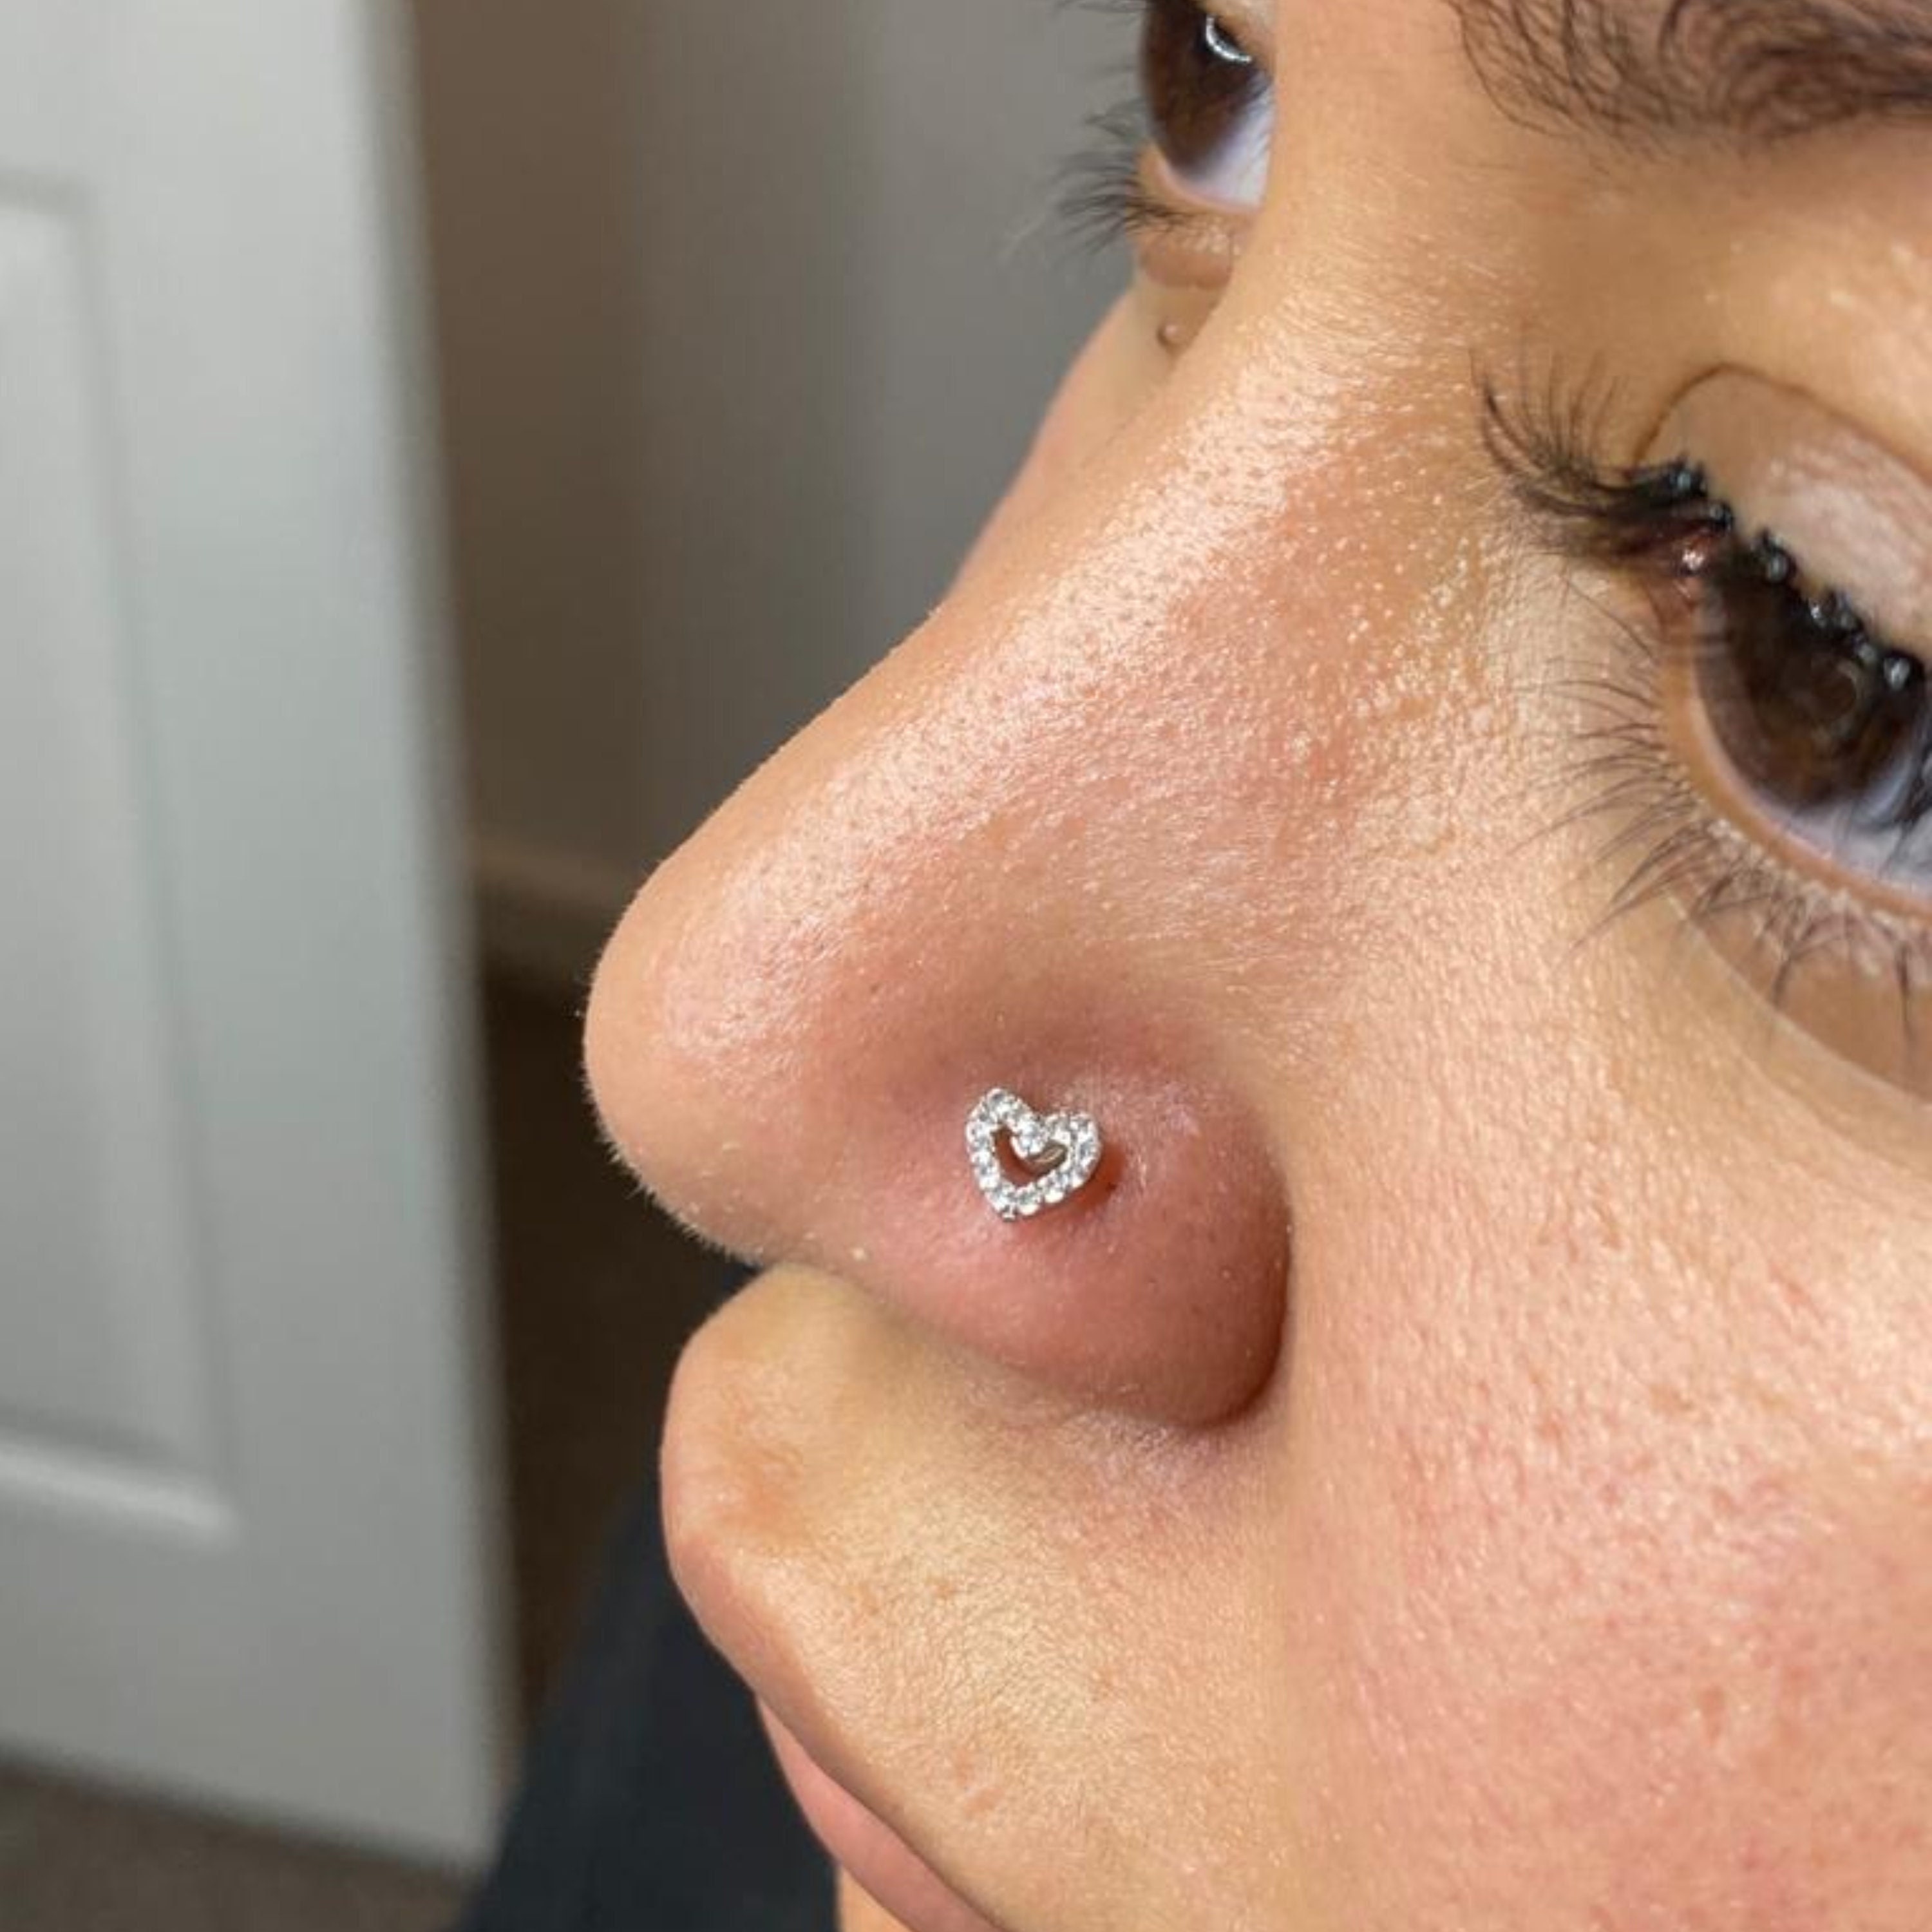 Hollow Heart Nose Stud 20G Zirconia Nose Bar Thin Barbell - Etsy